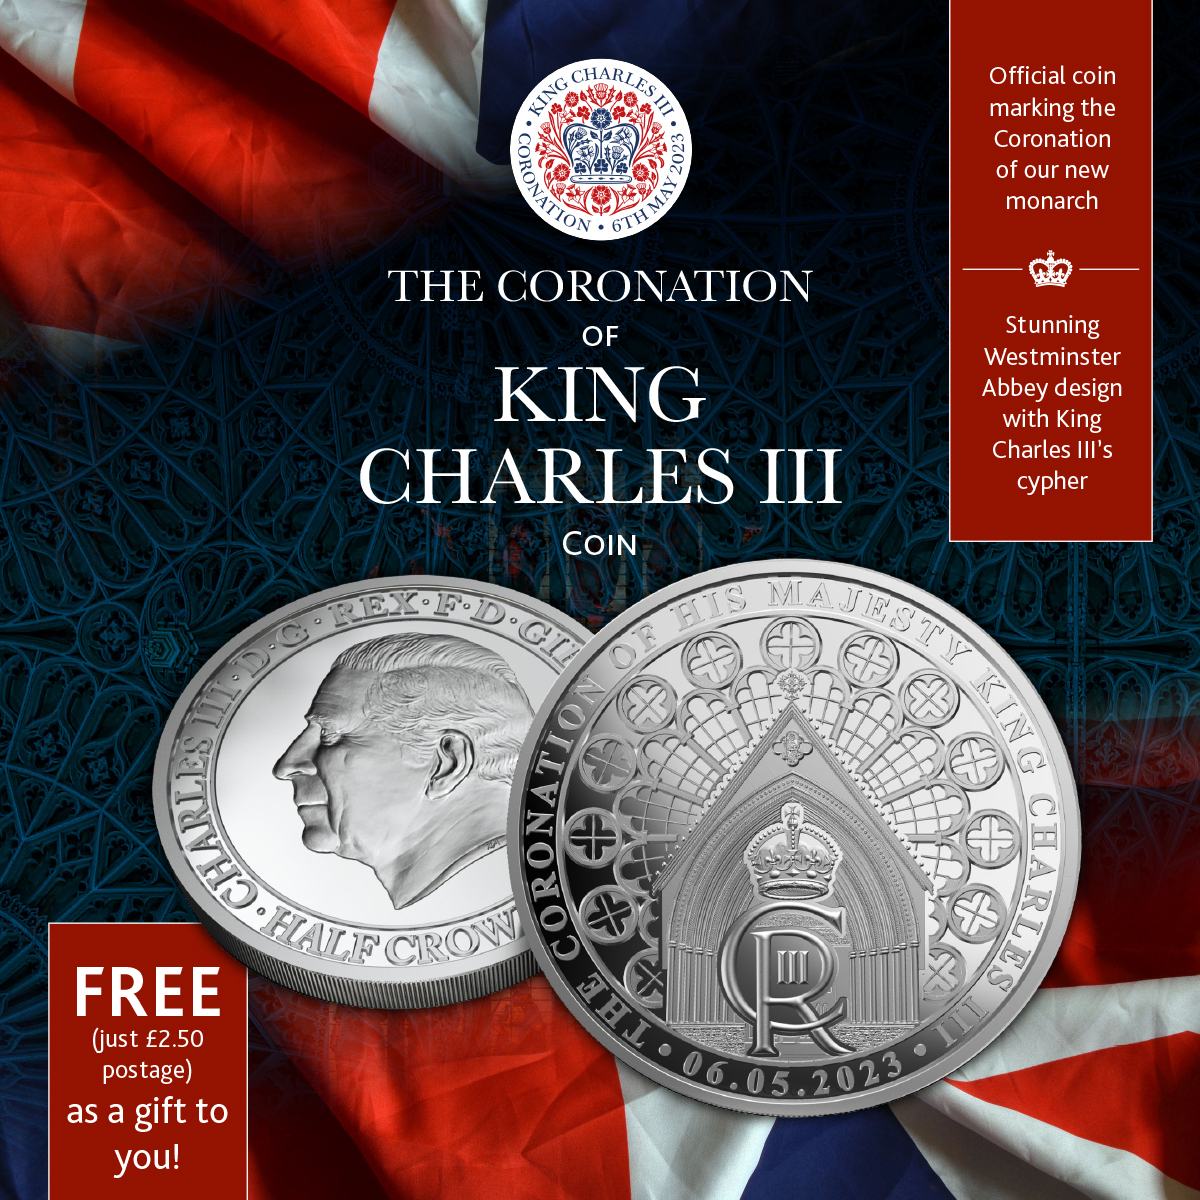 The London Mint Office launches FREE King Charles III coins to celebrate the Coronation | The Sun